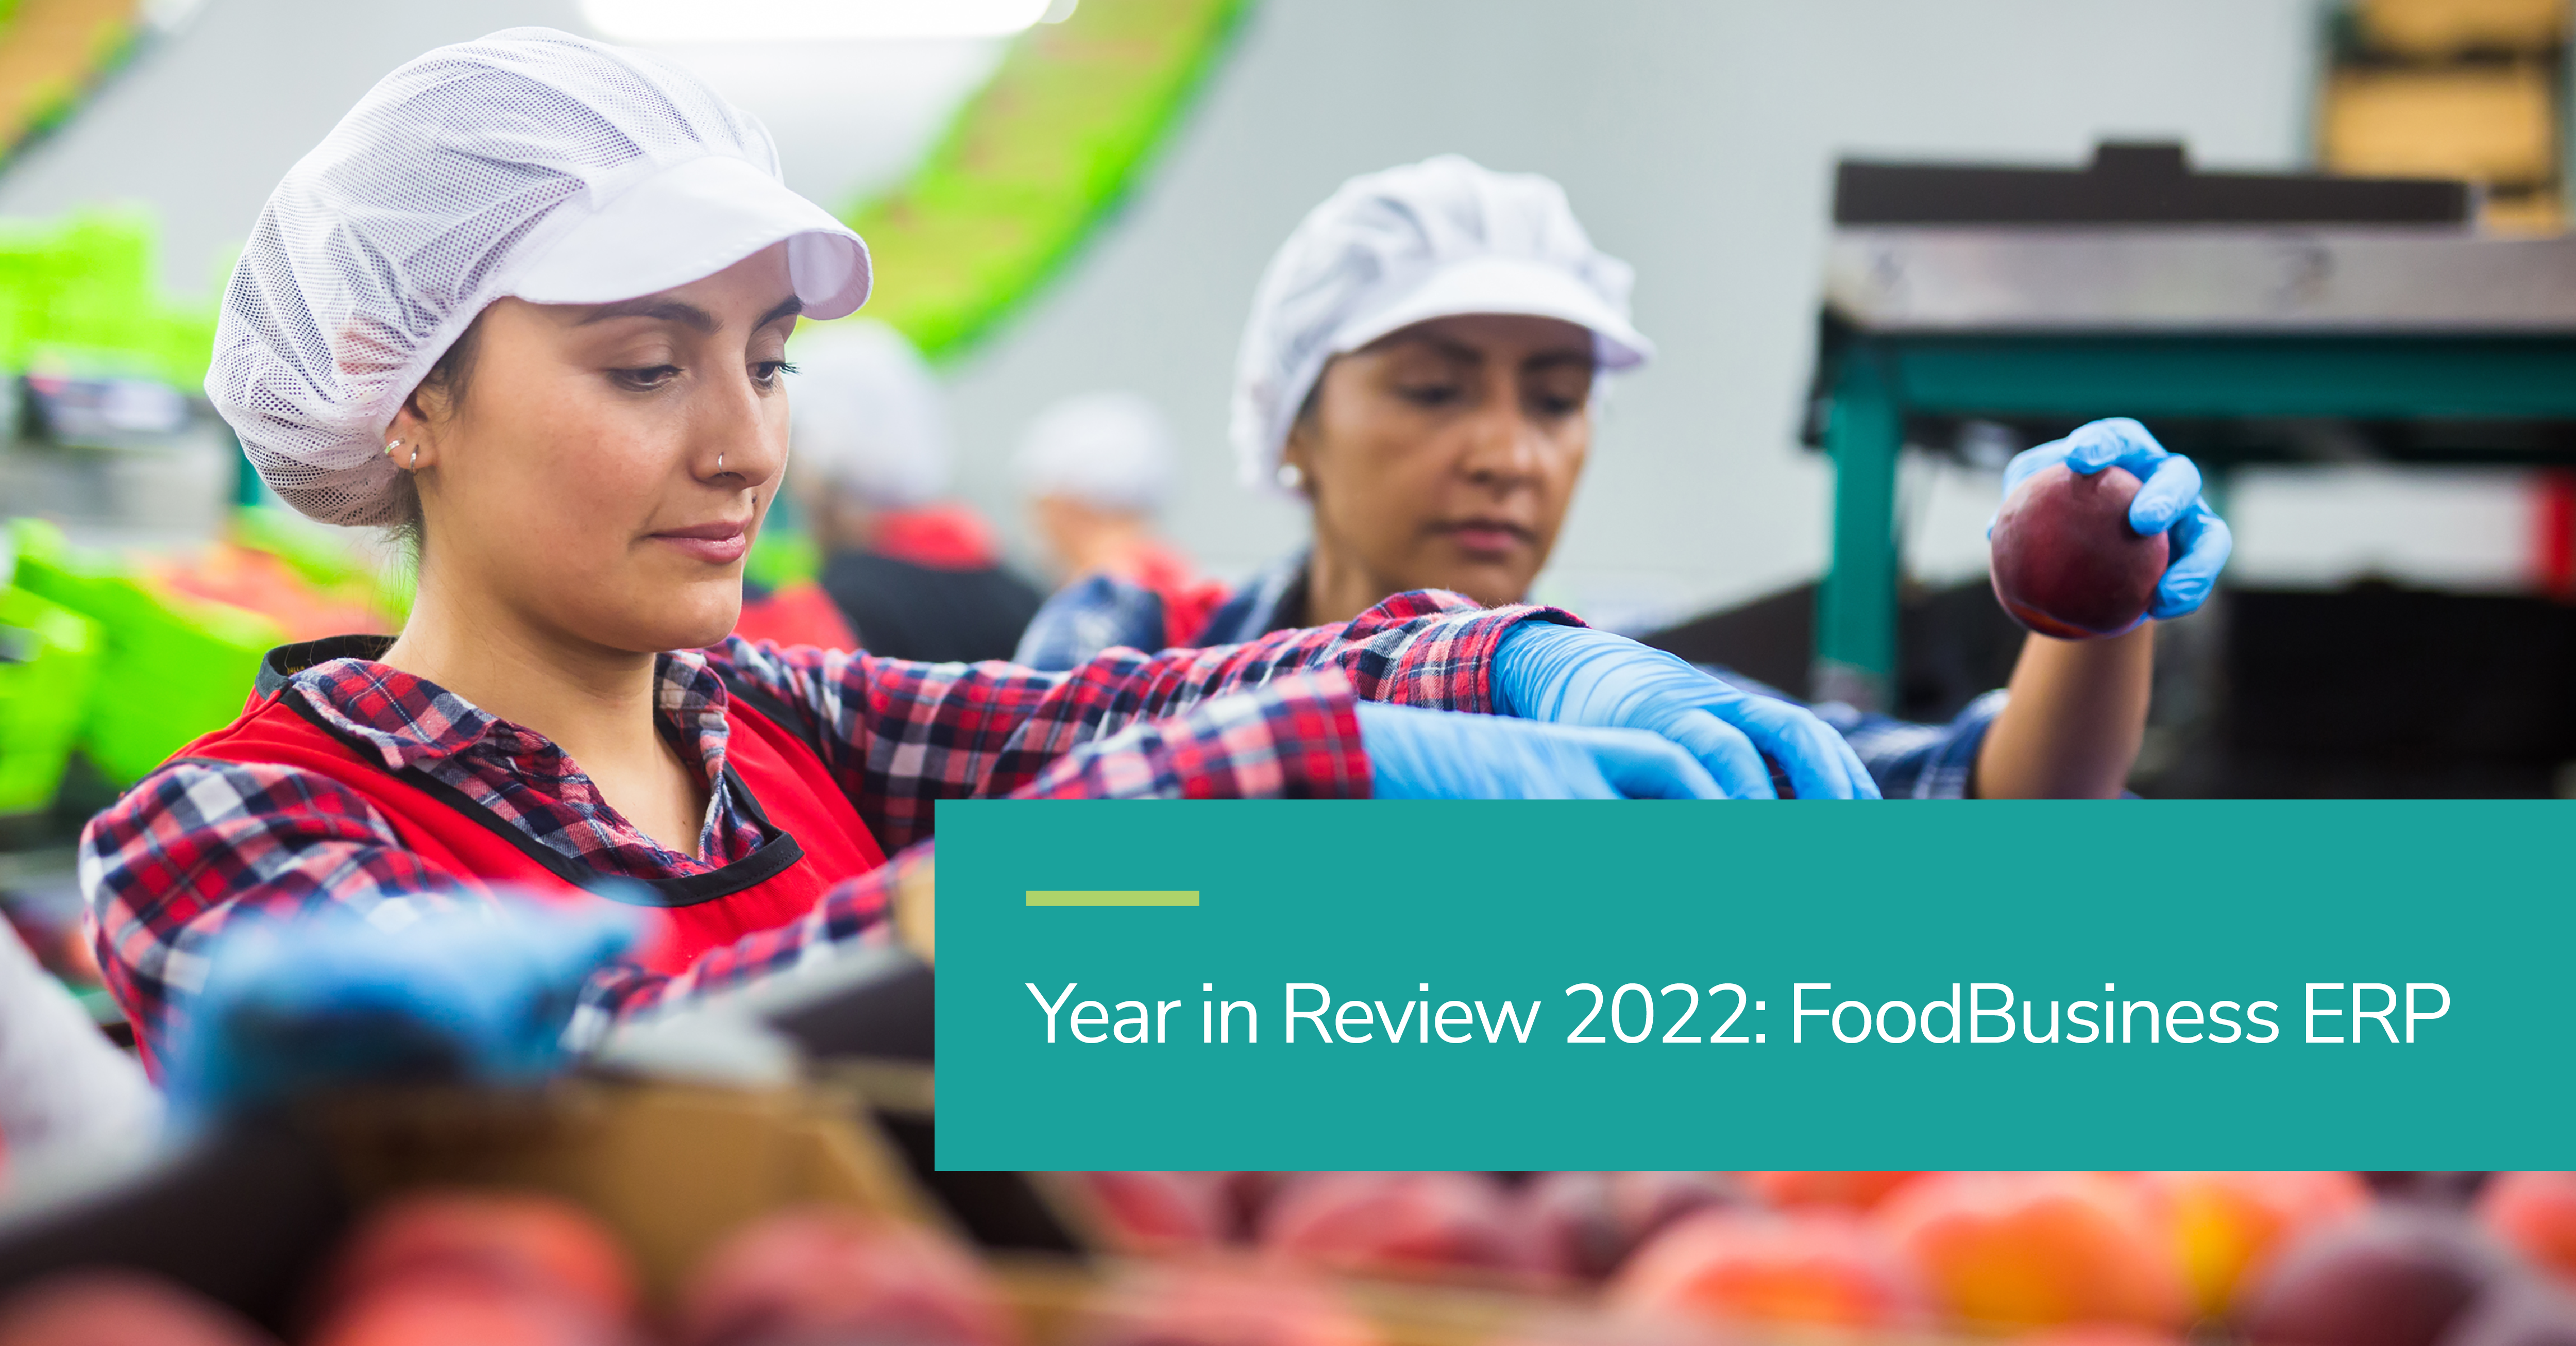 Year in Review 2022: FoodBusinessERP